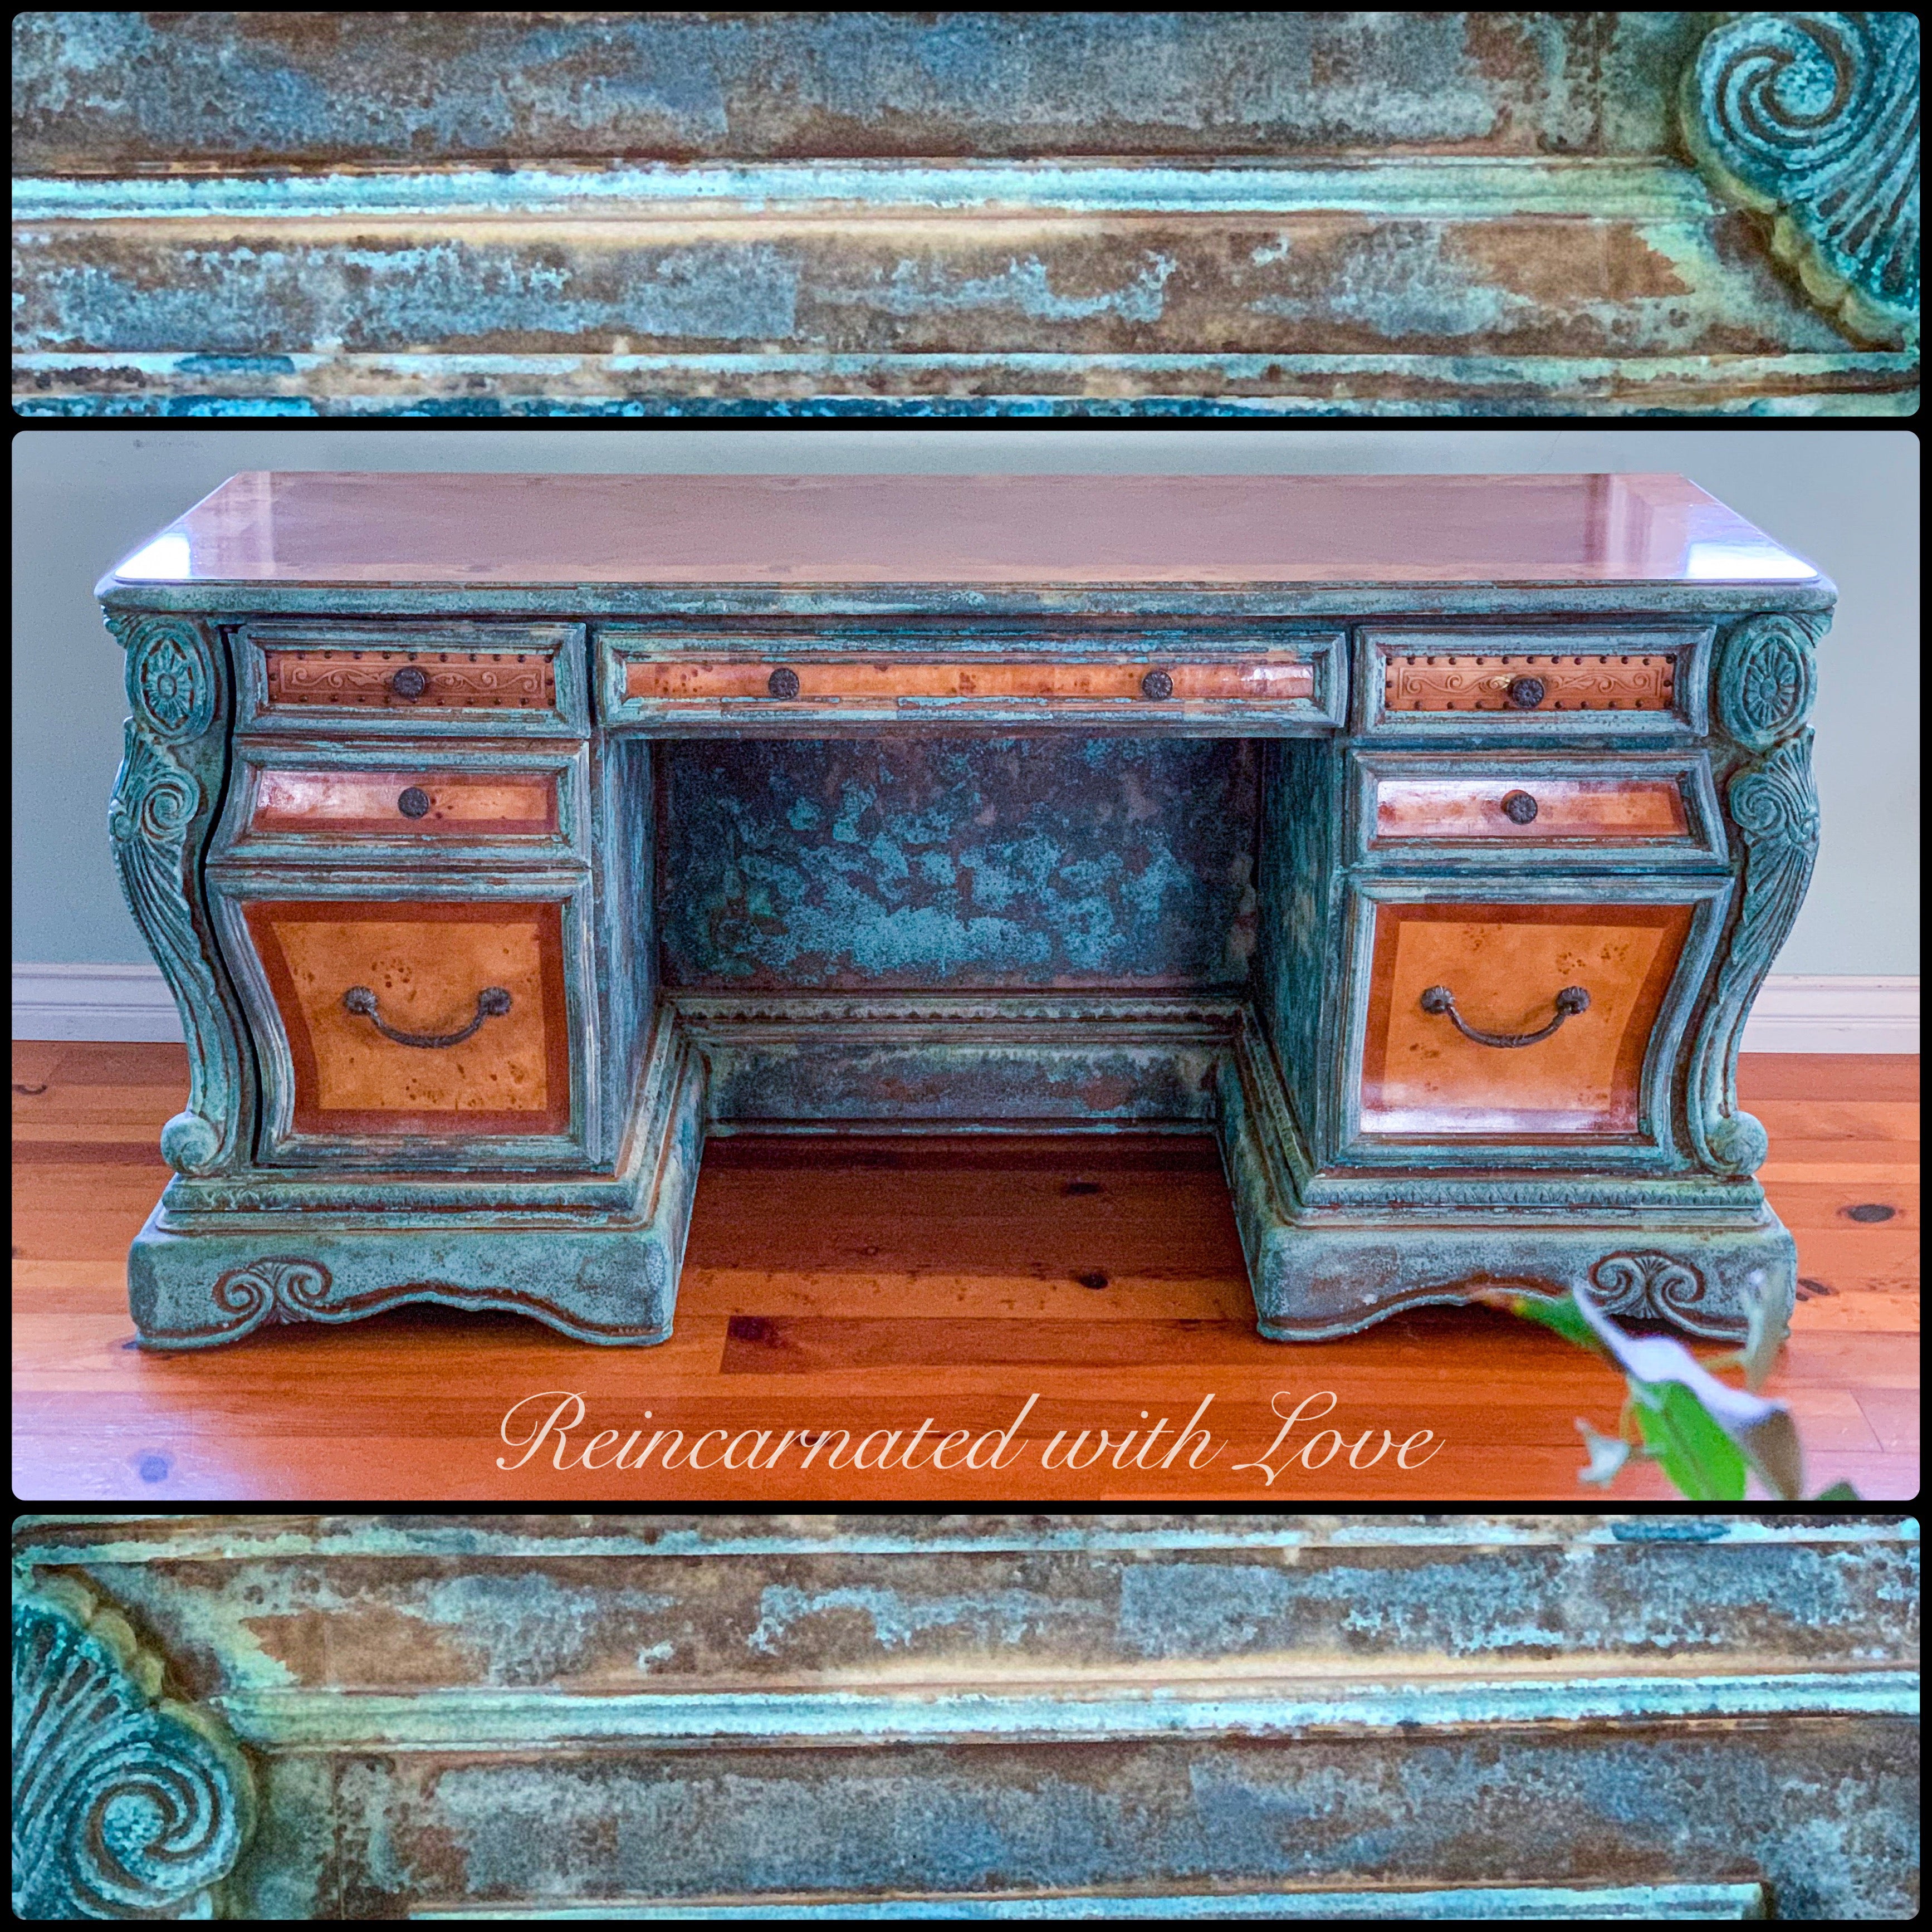 An art nouveau style desk, with a blue & green, patina finish, on stained, solid wood, from Reincarnated with Love.